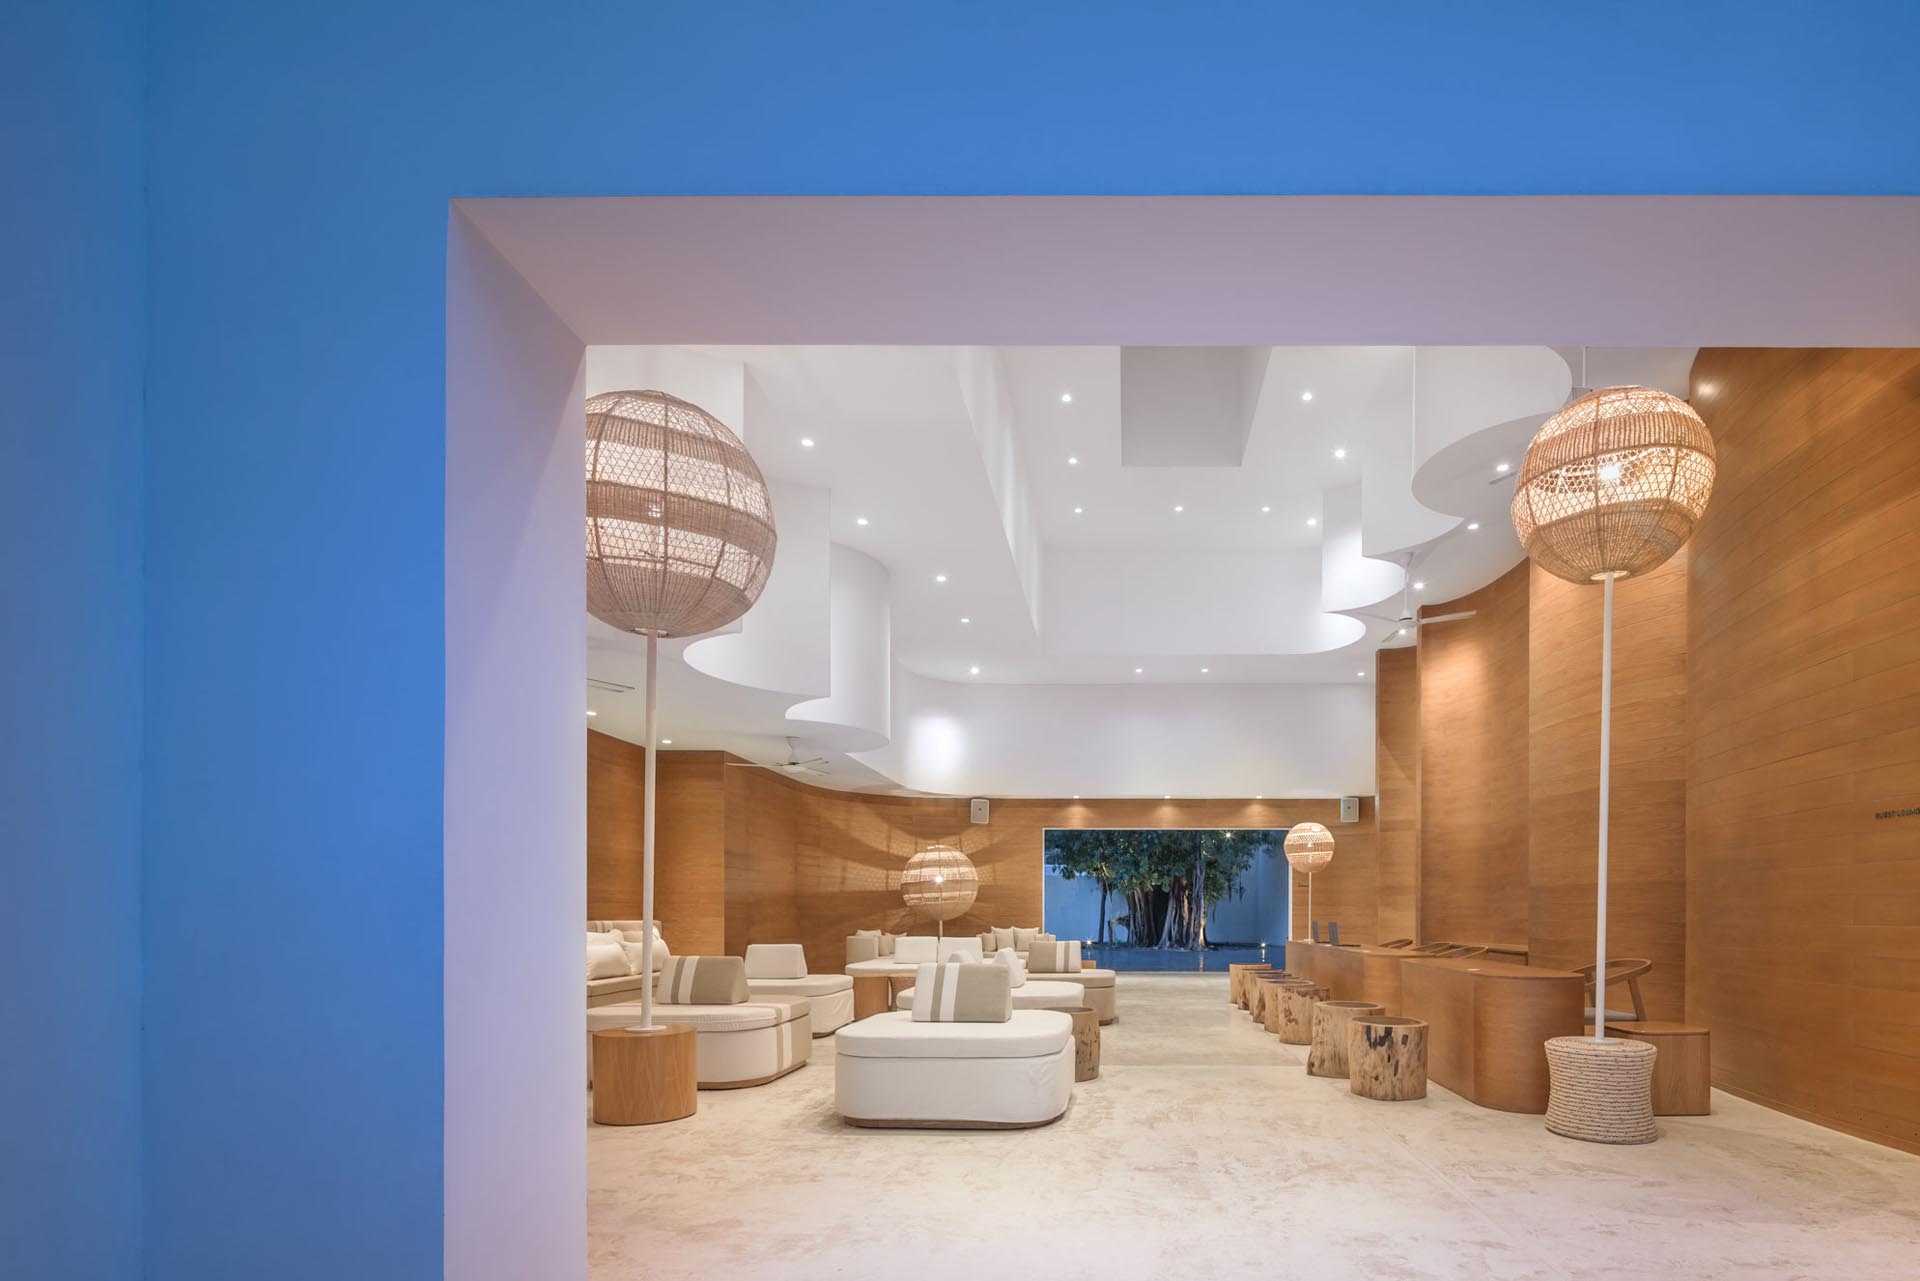 A modern hotel lobby with sculptural wood walls, woven lighting, and round furniture.